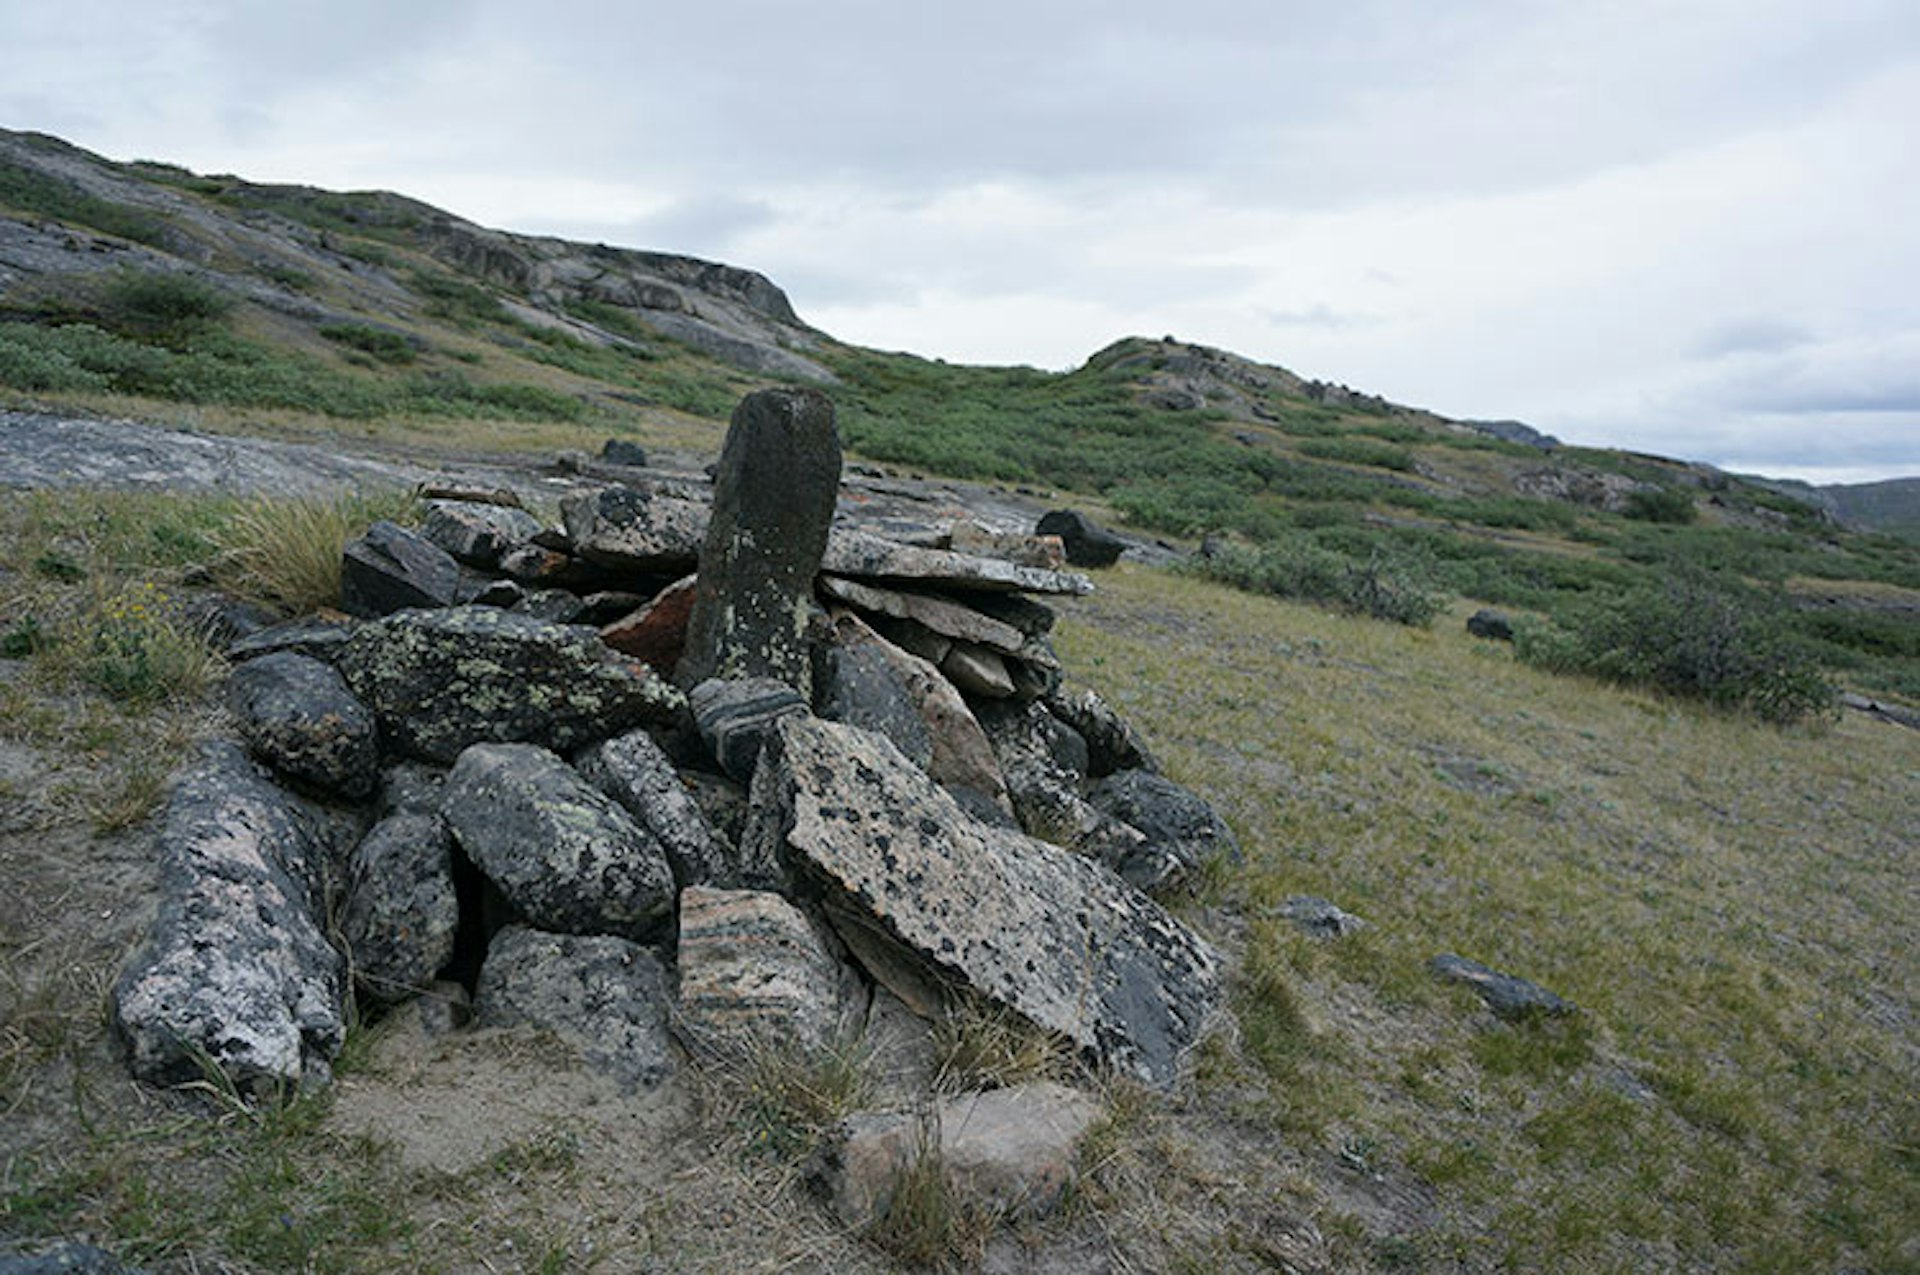 An Inuit grave: sites like this are easy to miss in the rocky expanse of western Greenland. Image by Anita Isalska / Lonely Planet